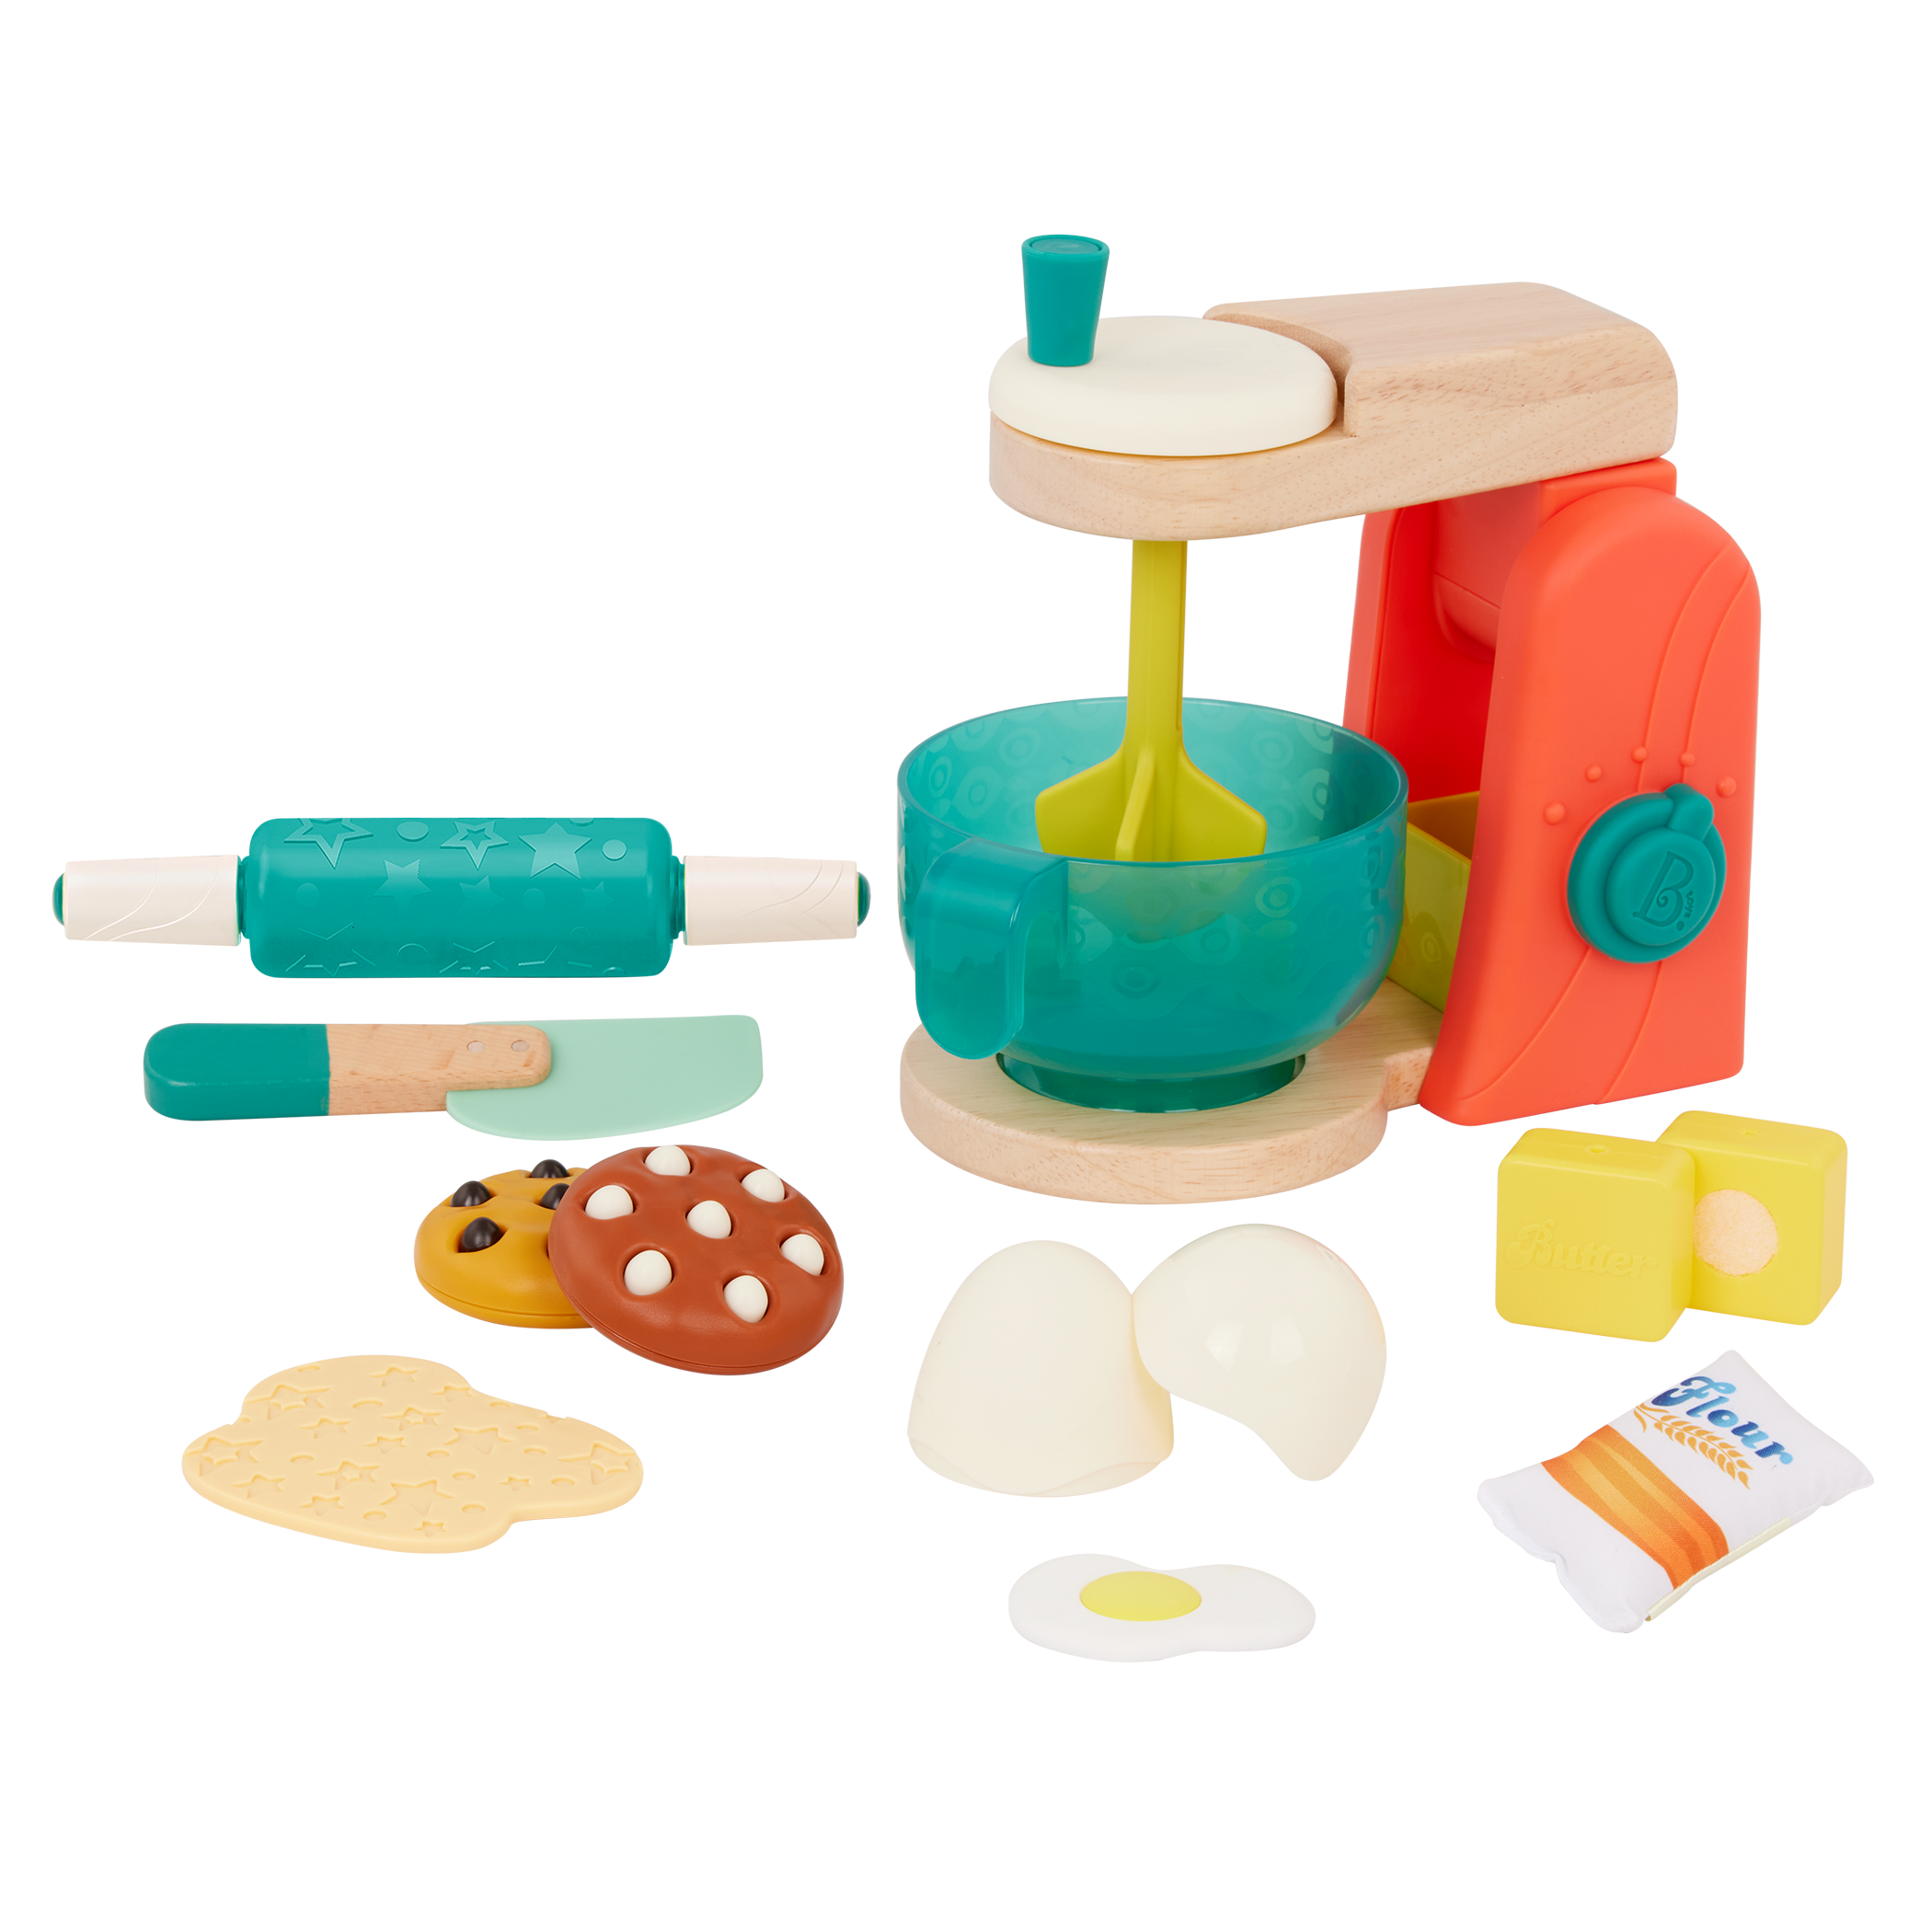 Melissa & Doug Wooden Make-A-Cake Mixer Set, 25 Wooden Toys For Toddlers  That Are Eco-Friendly, Adorable, and Educational!